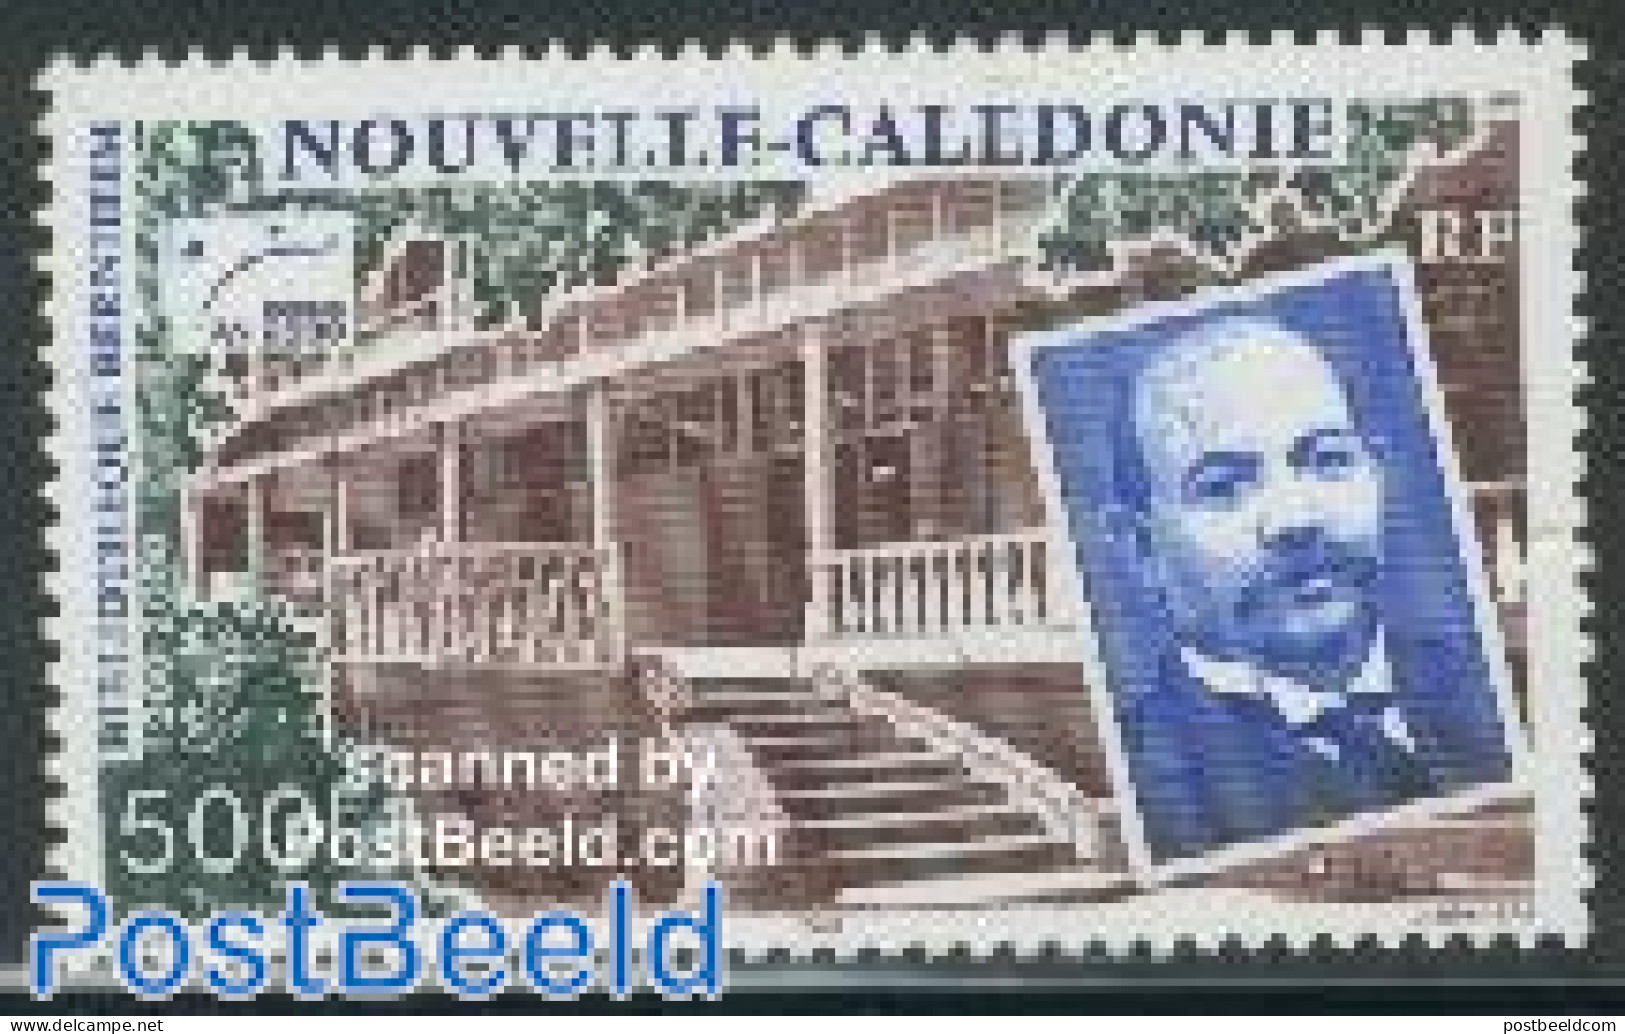 New Caledonia 2000 Bernheim Library 1v, Mint NH, Art - Libraries - Unused Stamps